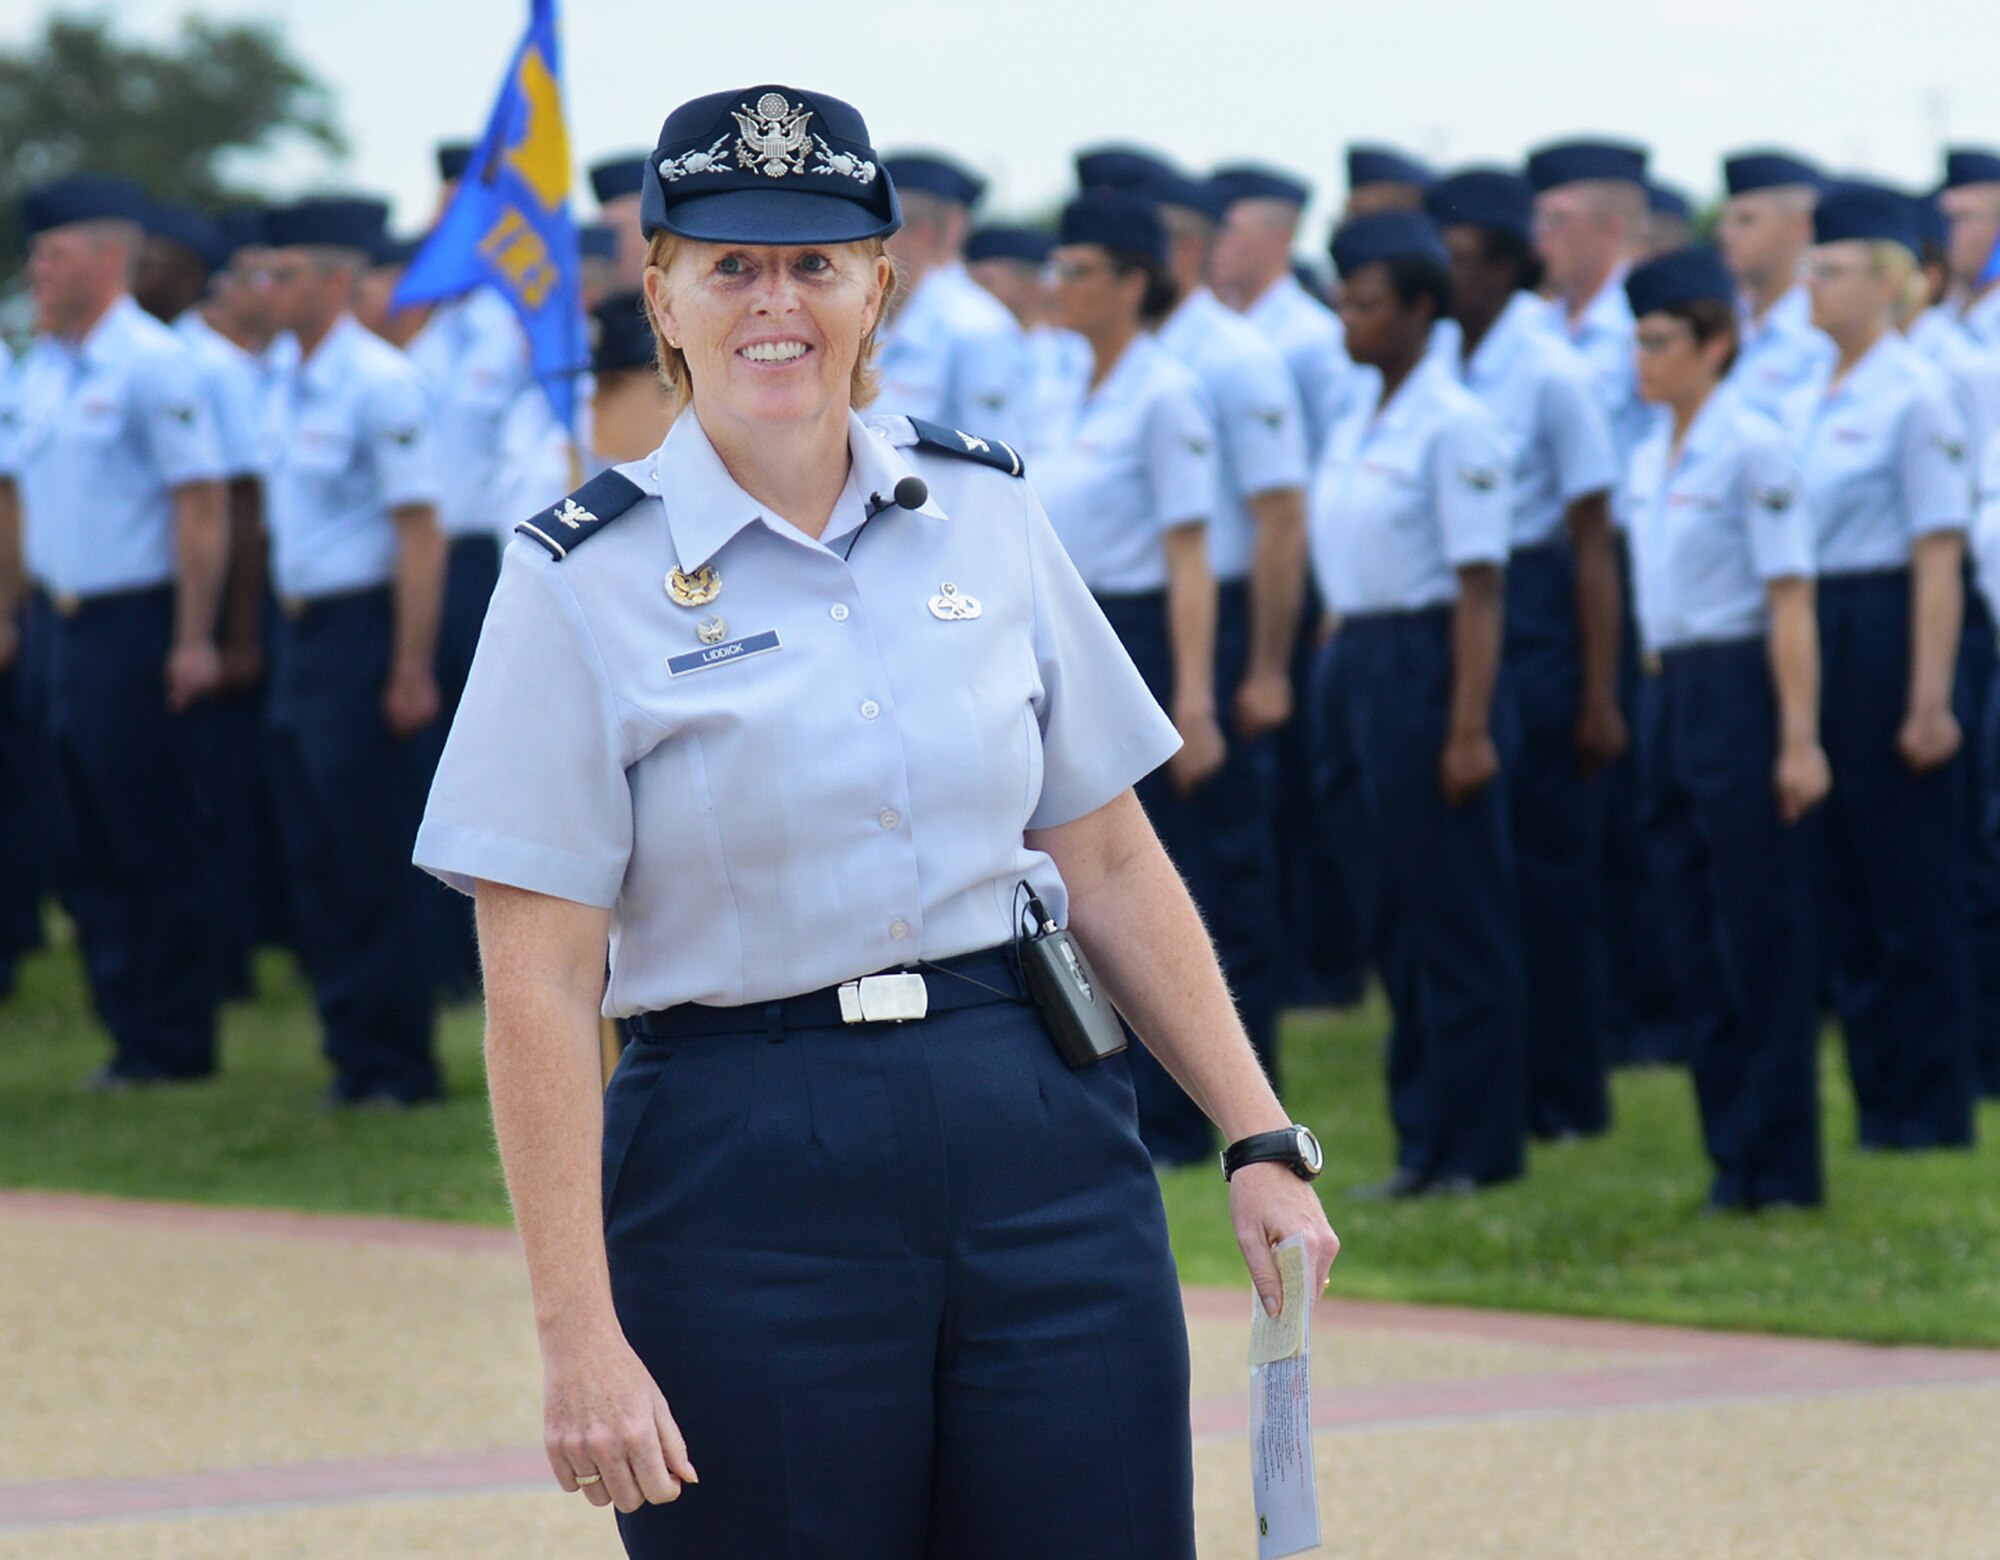 Col. Deborah Liddick, 737th Training Group commander,  pictured here June 6, 2013, oversaw her final Air Force Basic Military Training graduation and parade June 6 as the BMT senior leader. Following a BMT change of command ceremony June 9, Liddick retired after 25 years in the Air Force.